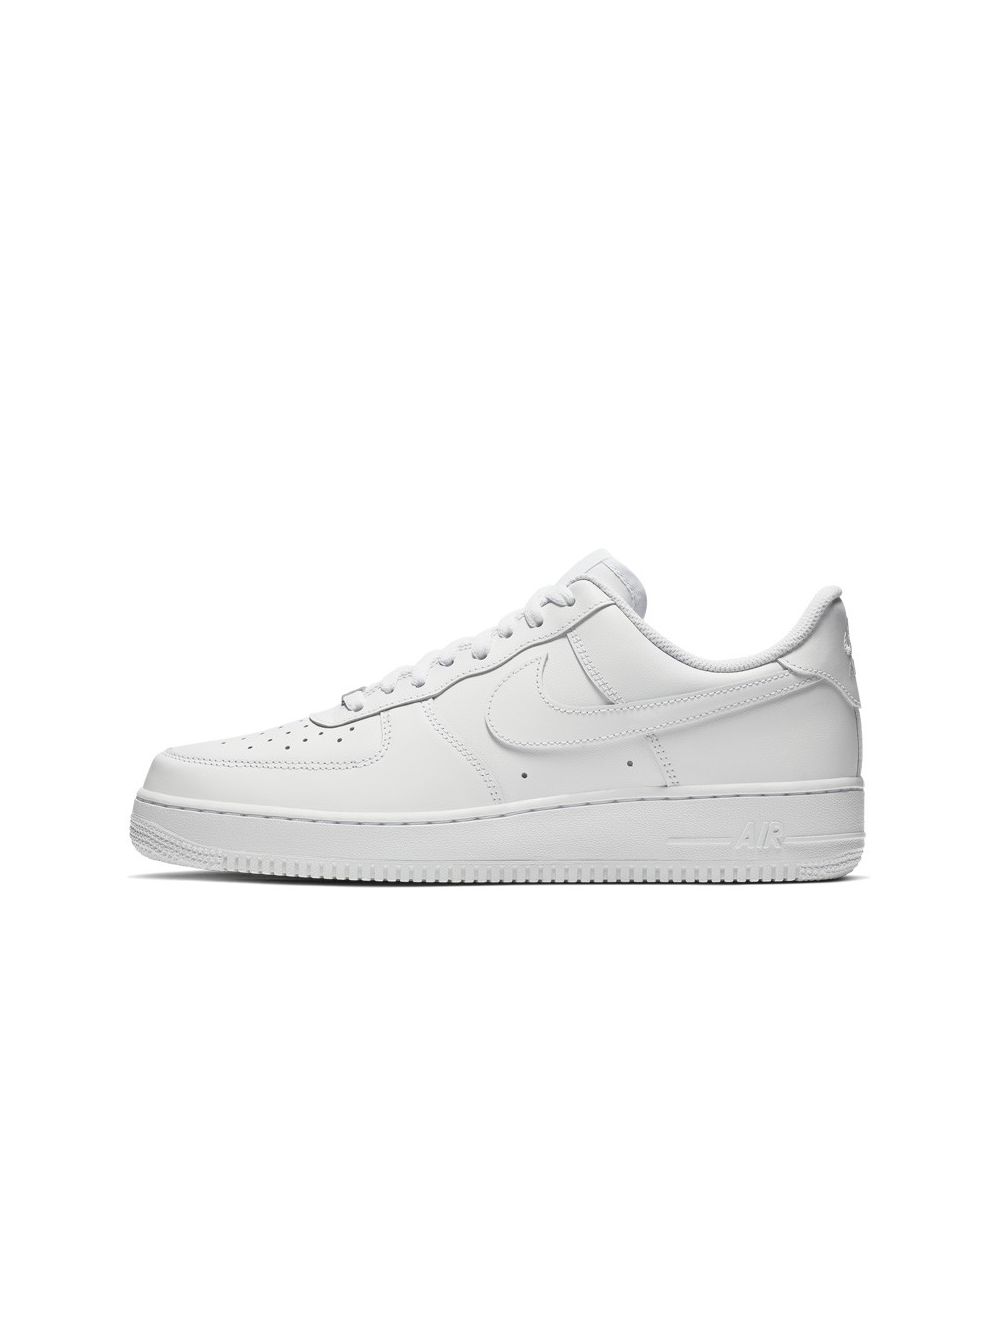 air force 1 youth white